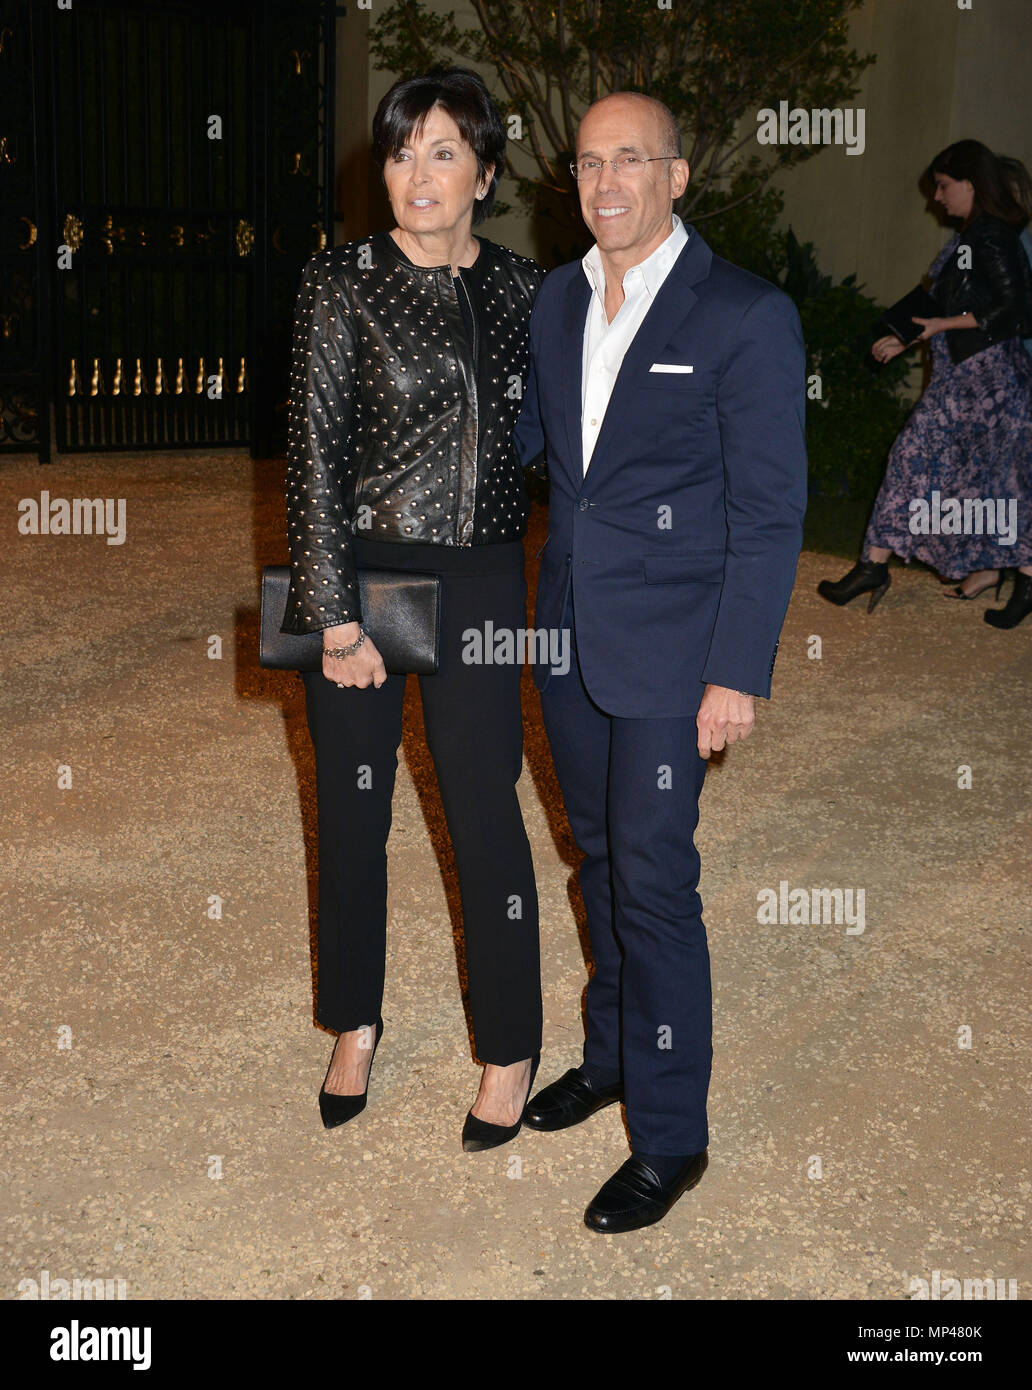 Jeffrey Katzenberg and wife  at the  Burberry  - London In Los Angeles at the Griffith park Observatory in Los Angeles. April 16, 2015.Jeffrey Katzenberg and wife  copy ------------- Red Carpet Event, Vertical, USA, Film Industry, Celebrities,  Photography, Bestof, Arts Culture and Entertainment, Topix Celebrities fashion /  Vertical, Best of, Event in Hollywood Life - California,  Red Carpet and backstage, USA, Film Industry, Celebrities,  movie celebrities, TV celebrities, Music celebrities, Photography, Bestof, Arts Culture and Entertainment,  Topix, vertical,  family from from the year , 2 Stock Photo